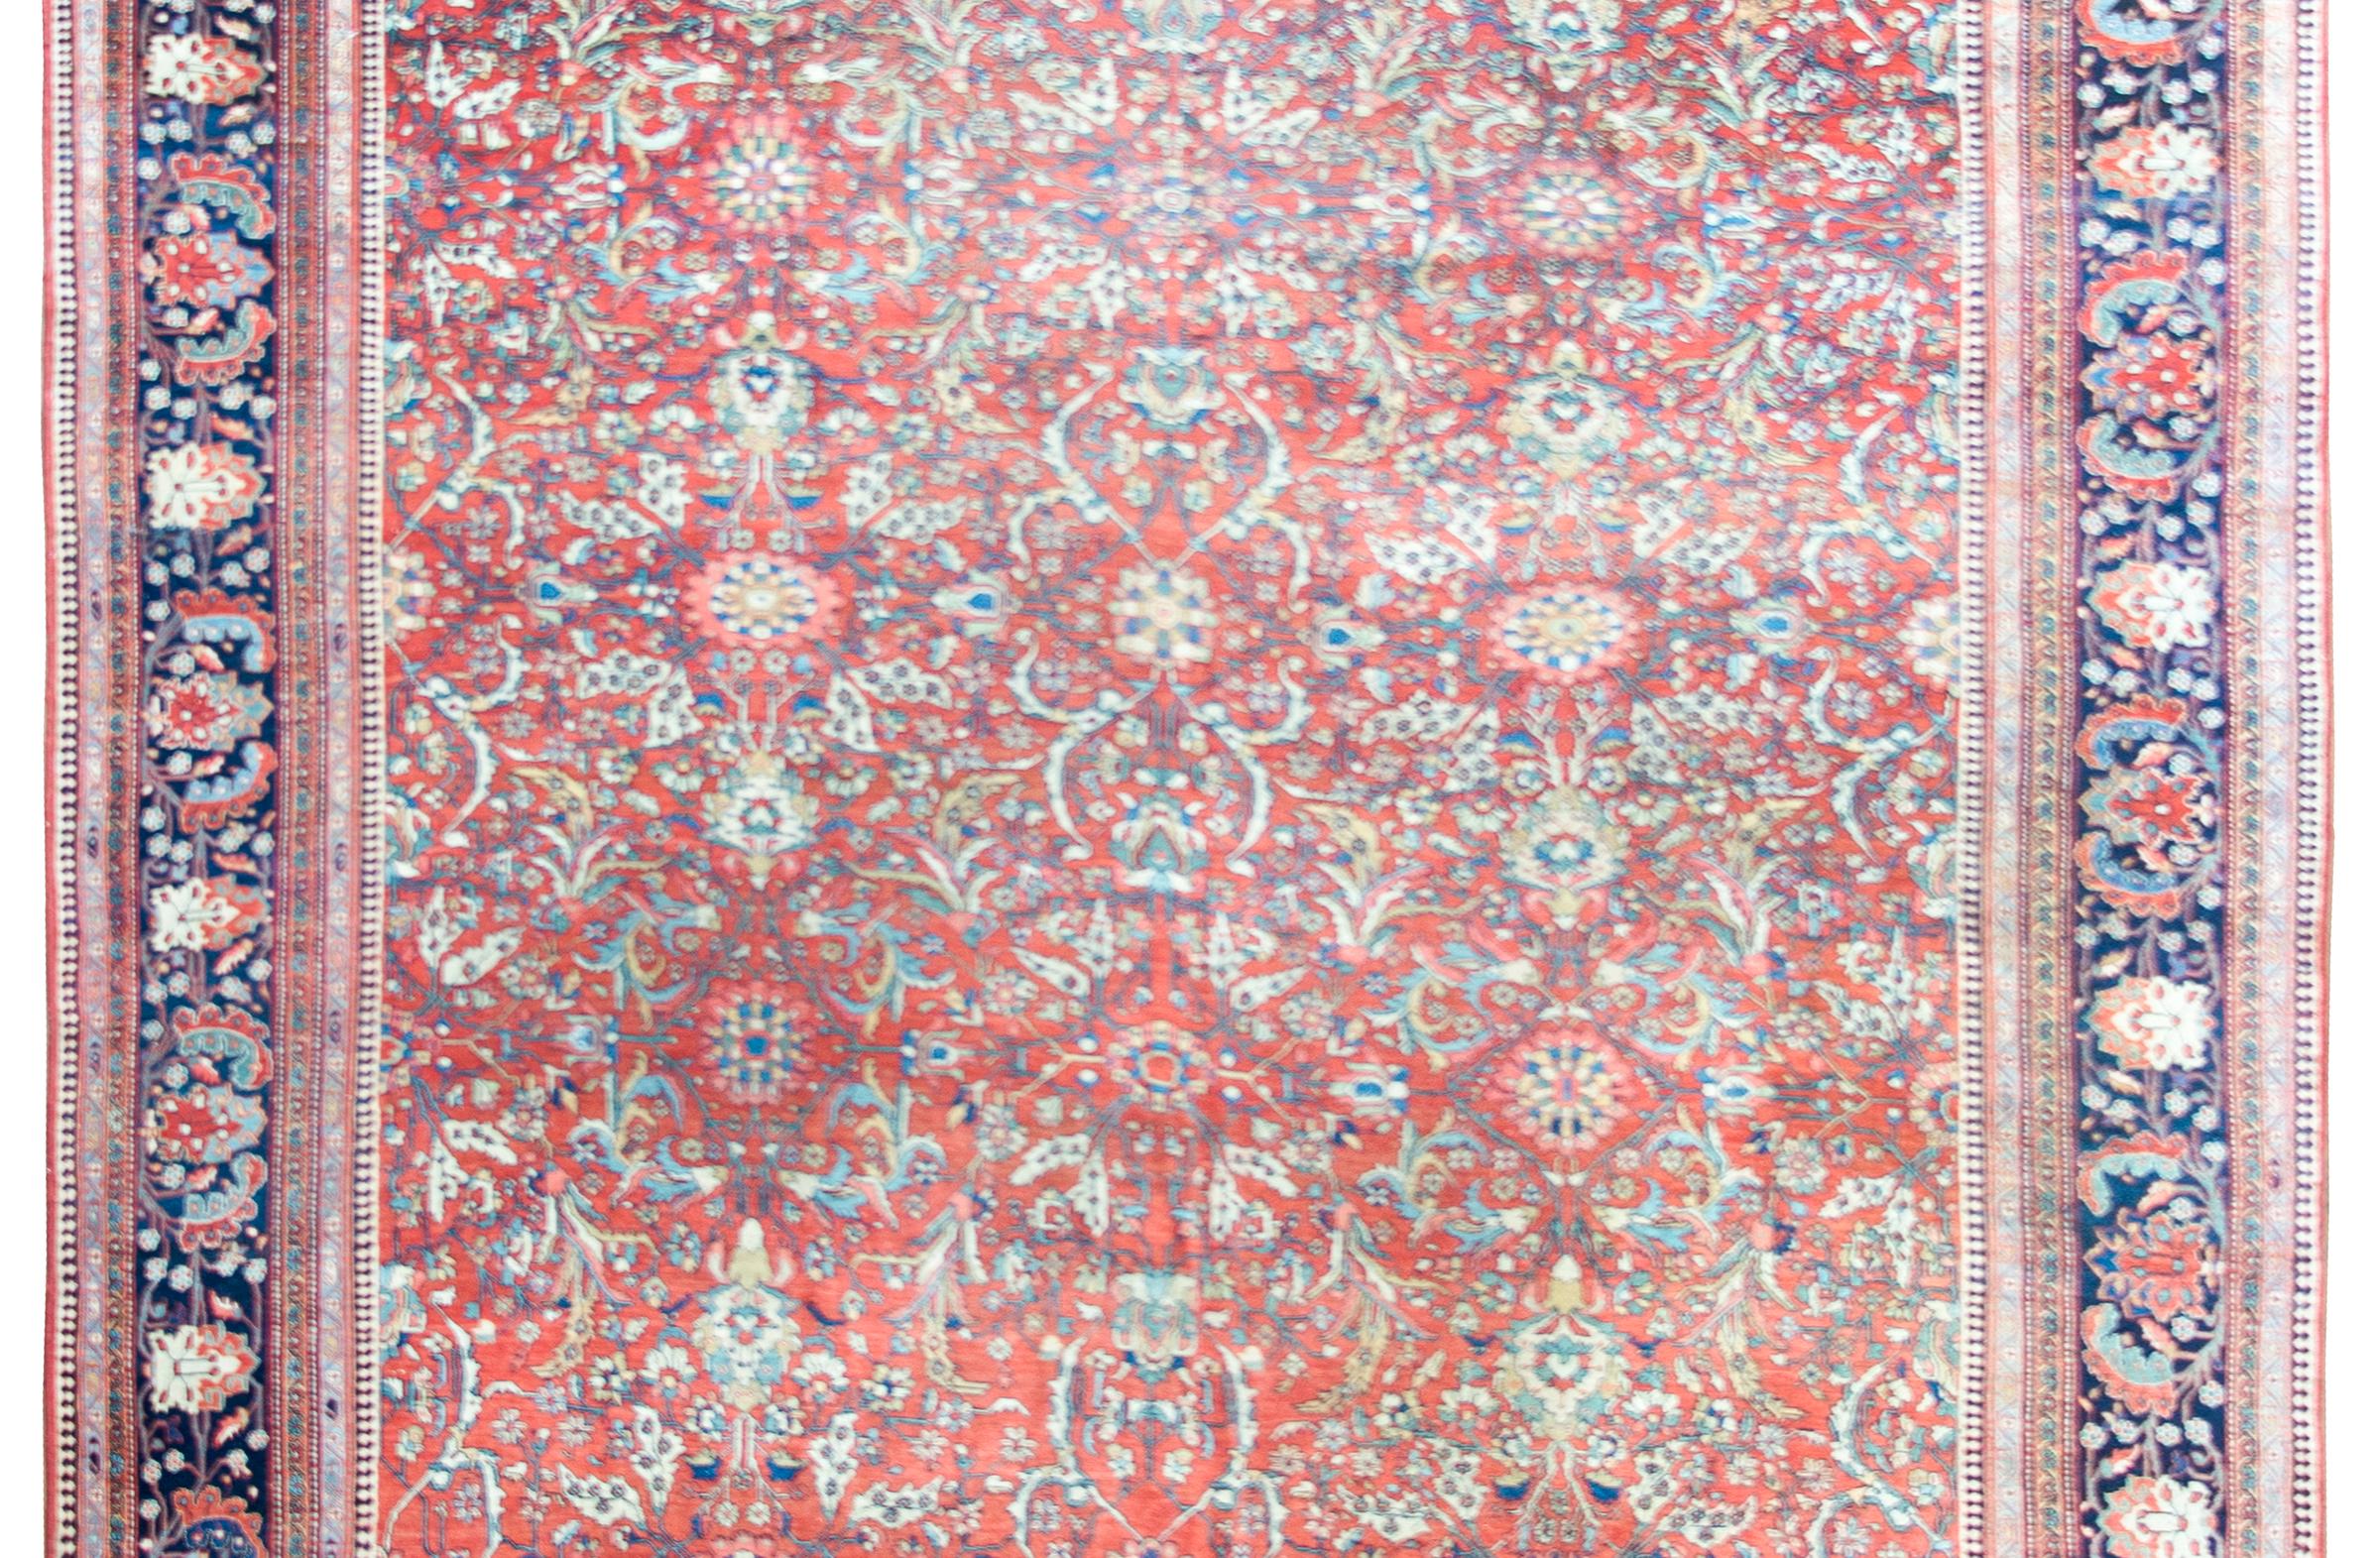 A stunning late 19th century Persian Sarouk Farahan rug with an all-over mirrored trellis floral and scrolling vine patterned field woven with large-scale flower and leaves, and surrounded by an incredible border with more large-scale flowers